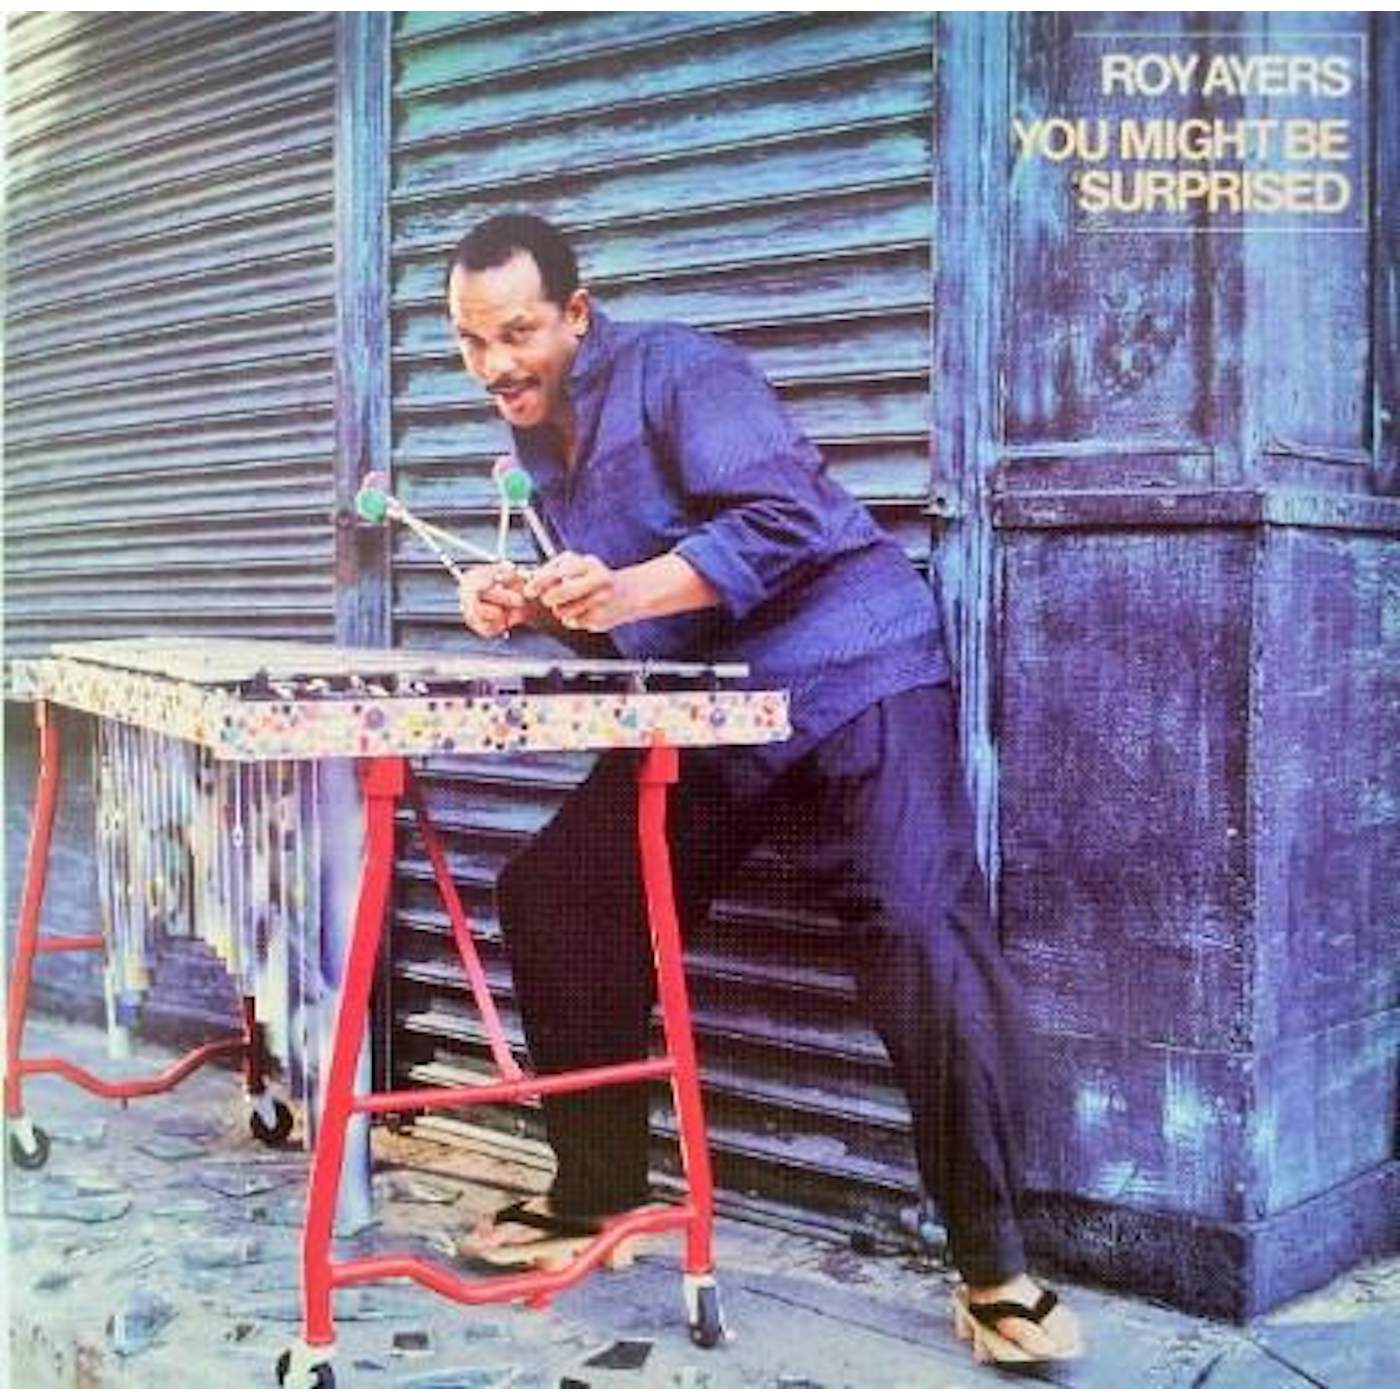 Roy Ayers YOU MIGHT BE SURPRISED CD